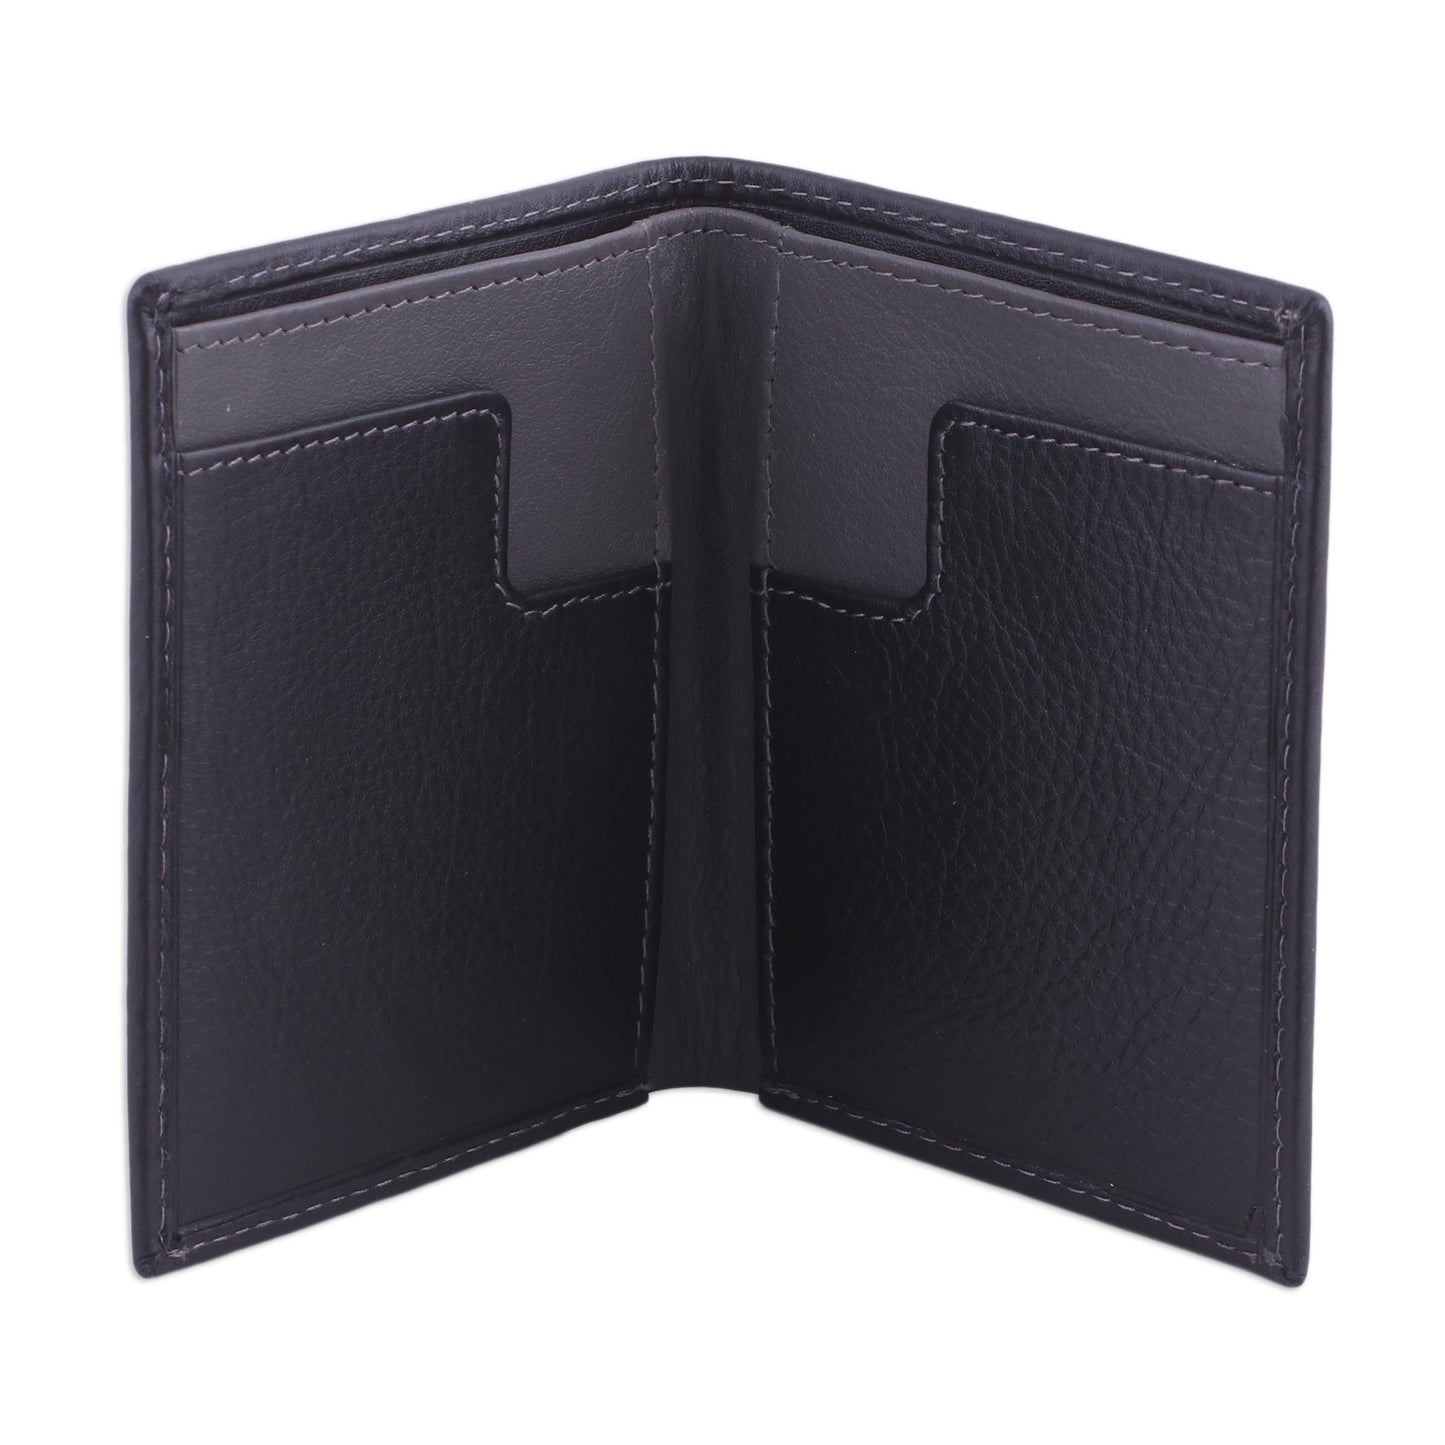 Reliable Black Leather Card Holder Wallet in Black and Grey